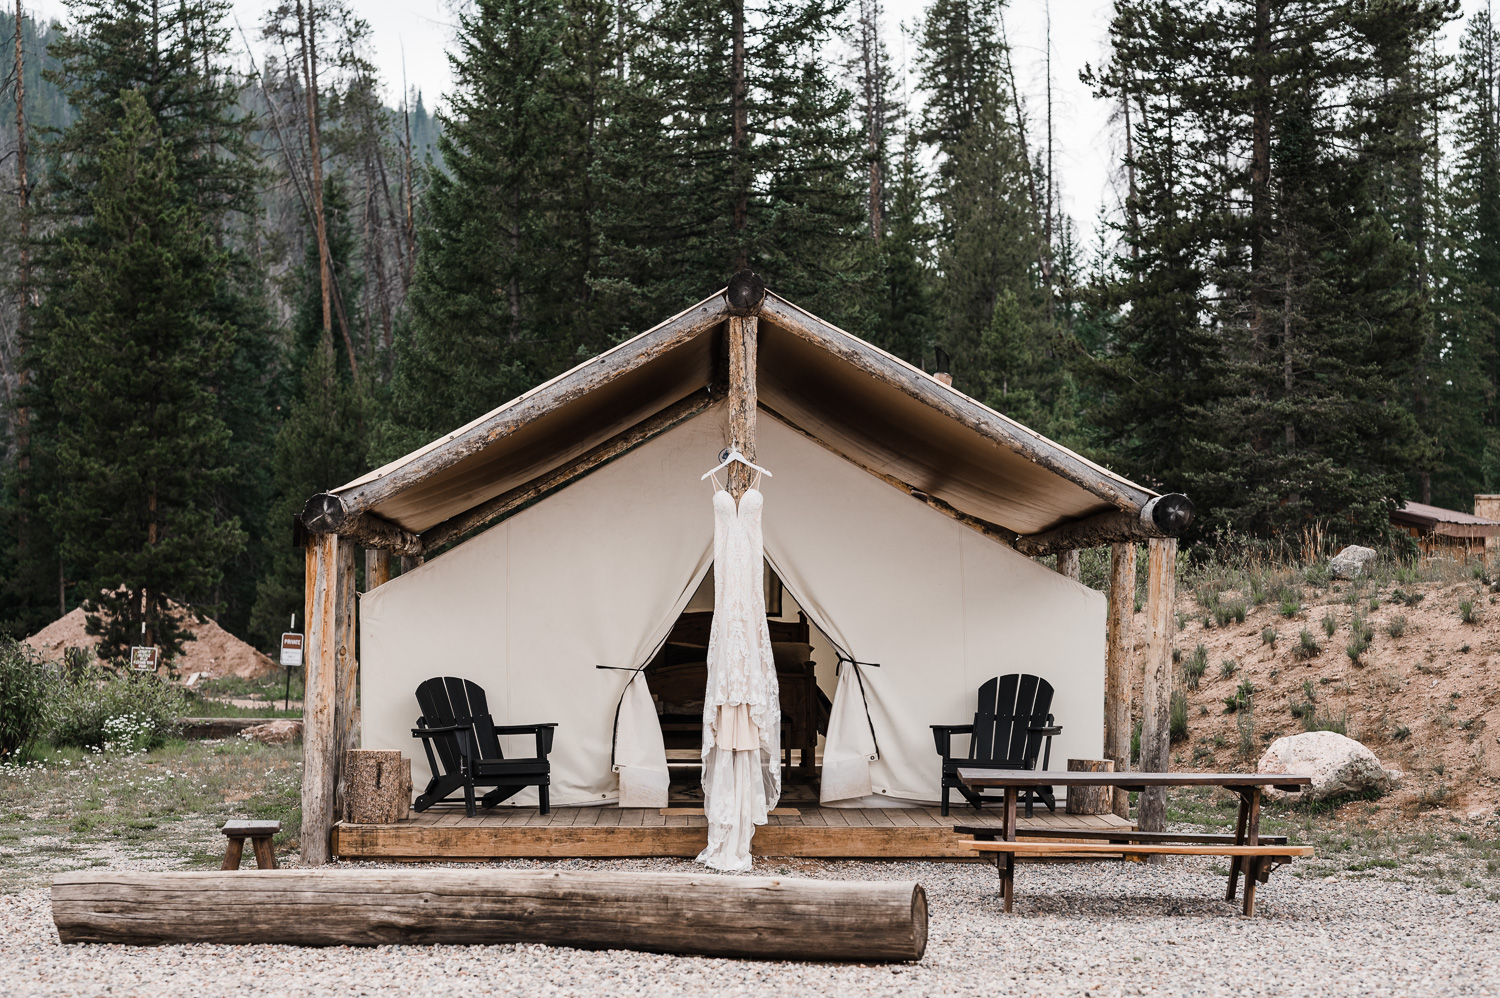 Beaded and Lace wedding dress hanging on glamping tent at Piney River Ranch